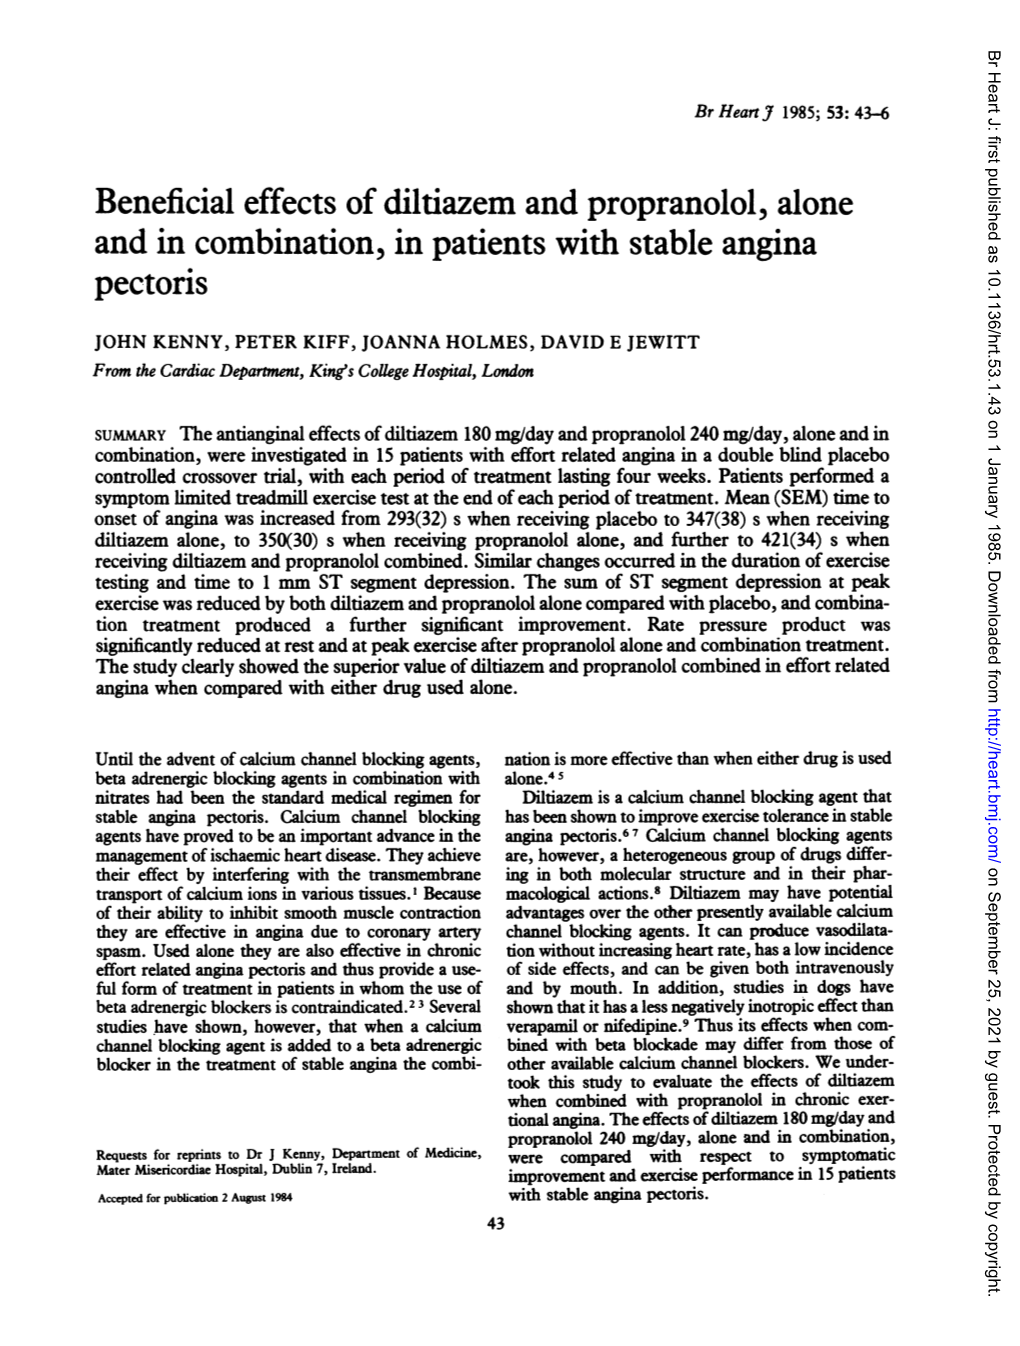 Beneficial Effects of Diltiazem and Propranolol, Alone and in Combination, in Patients with Stable Angina Pectoris